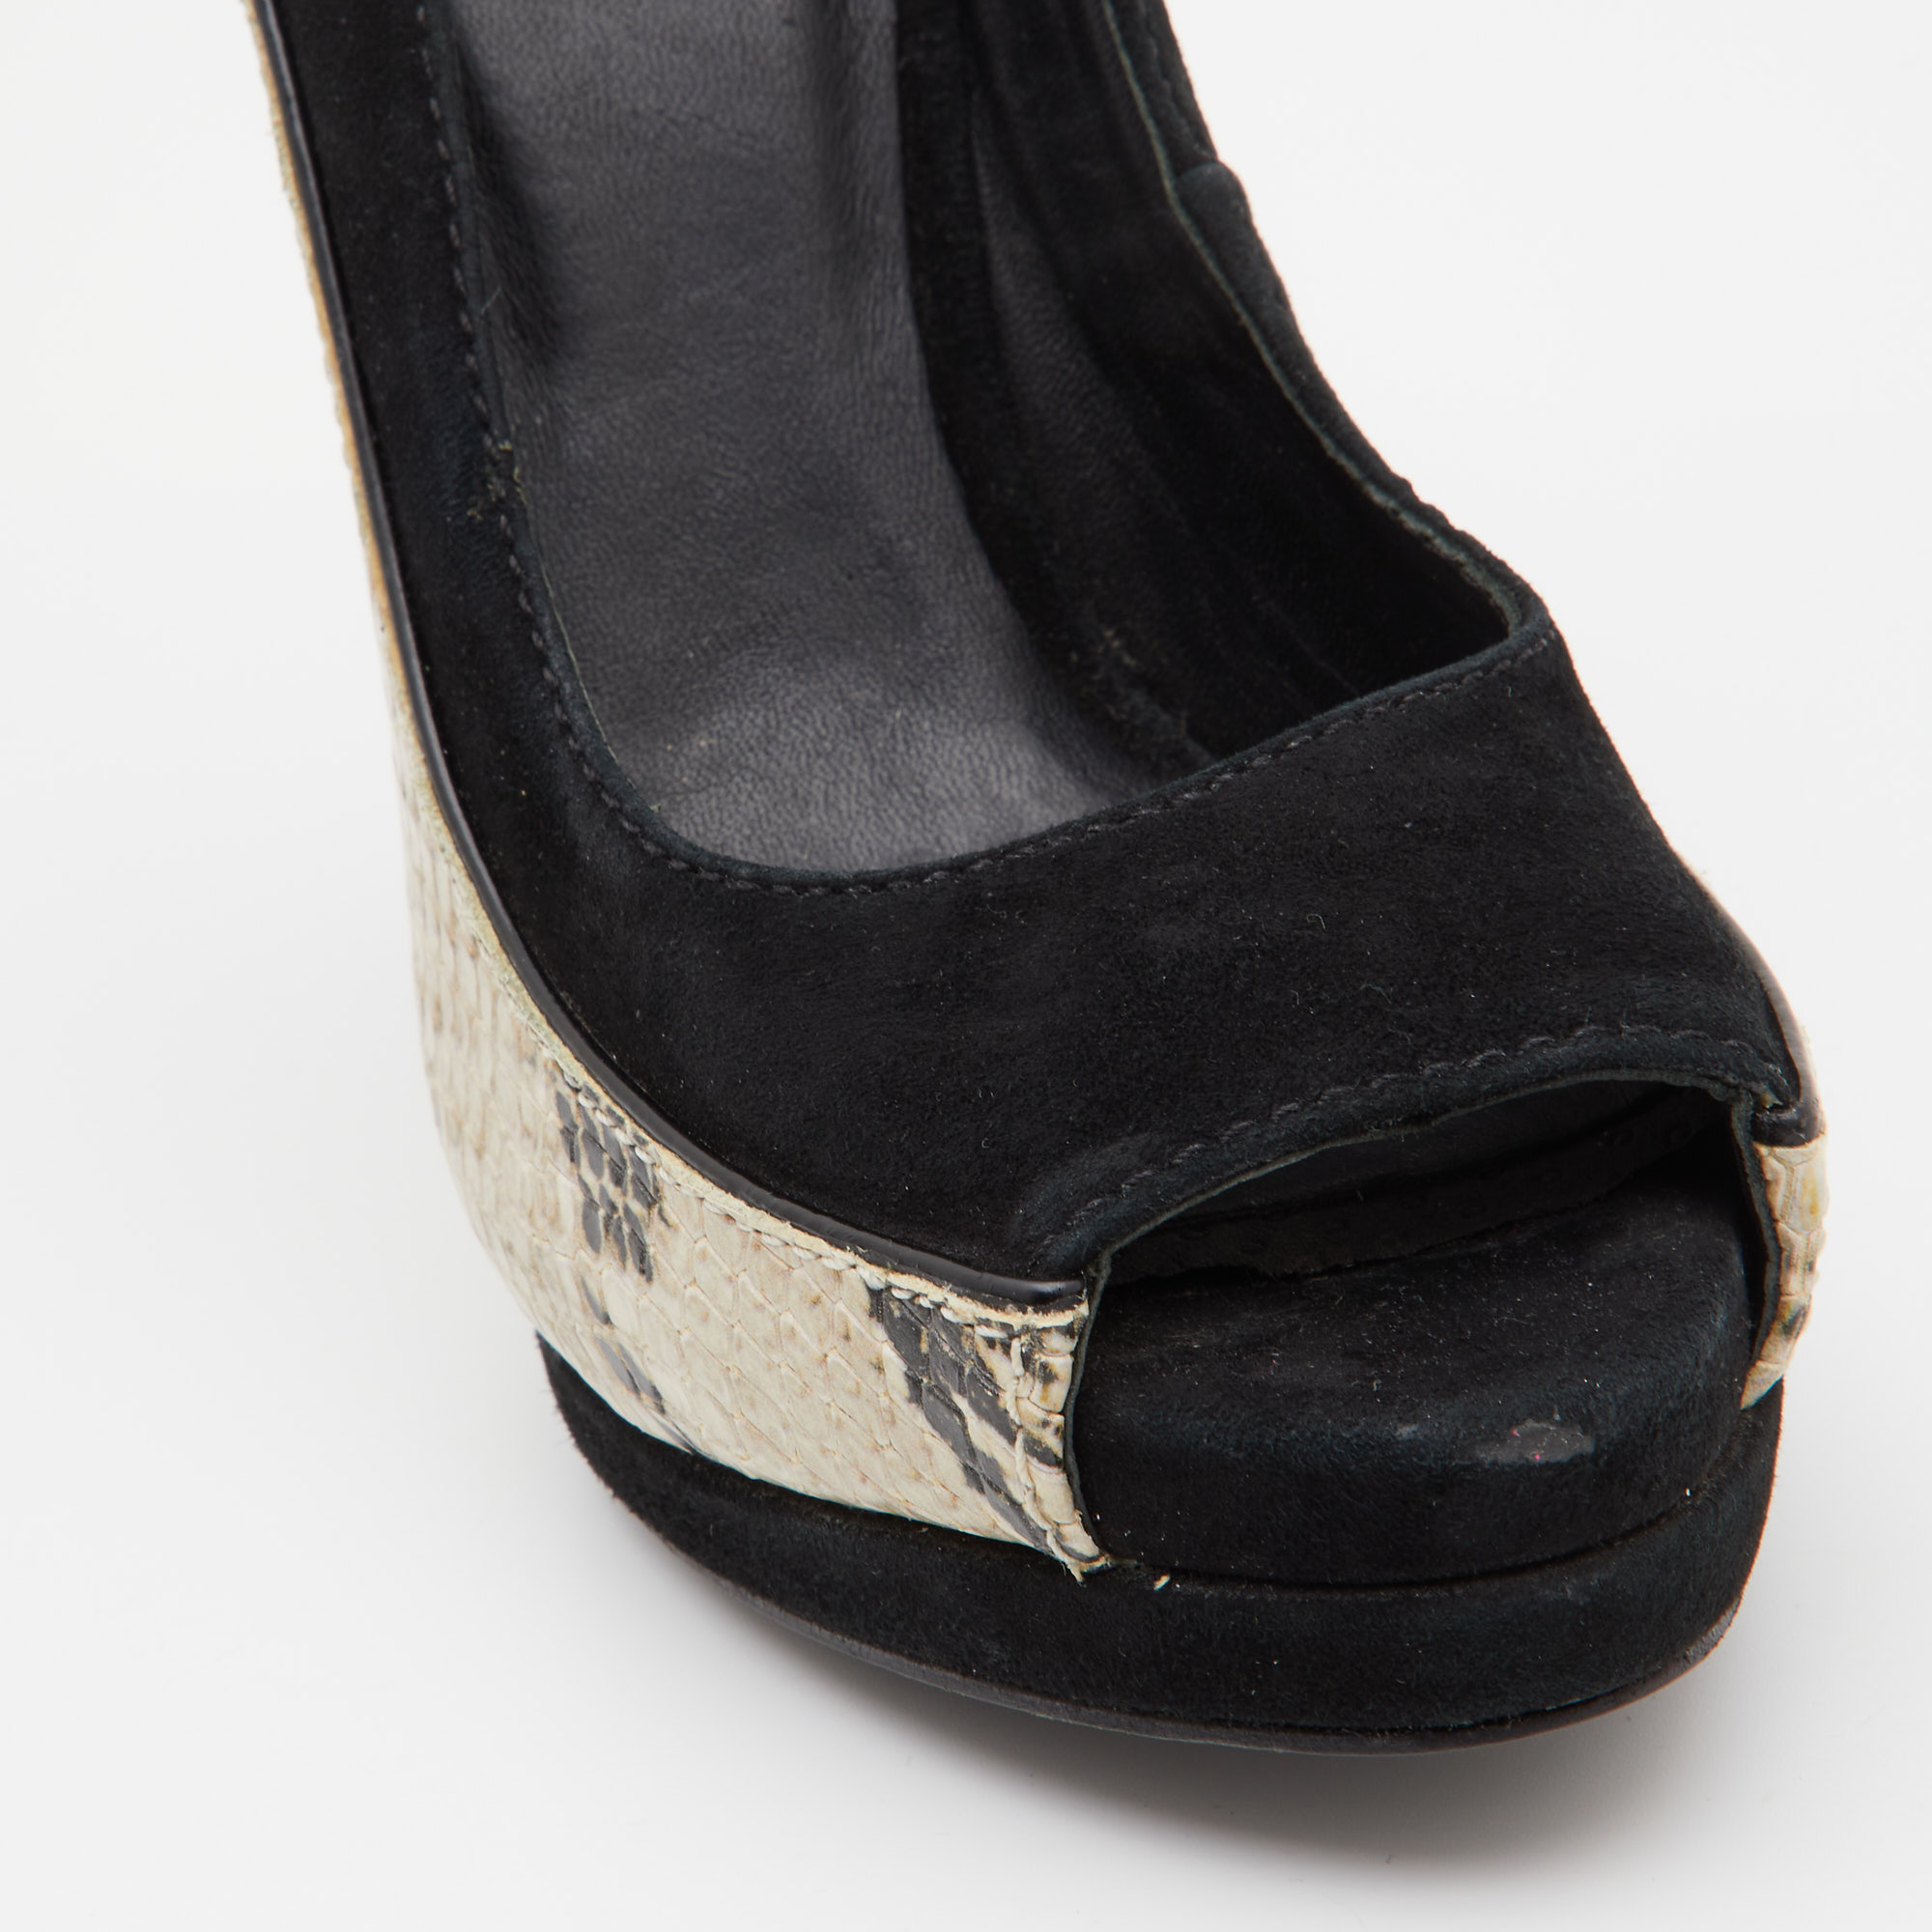 Tory Burch Black/Grey Suede And Python Embossed Leather Sandra Wedge Peep Toe Pumps Size 36.5